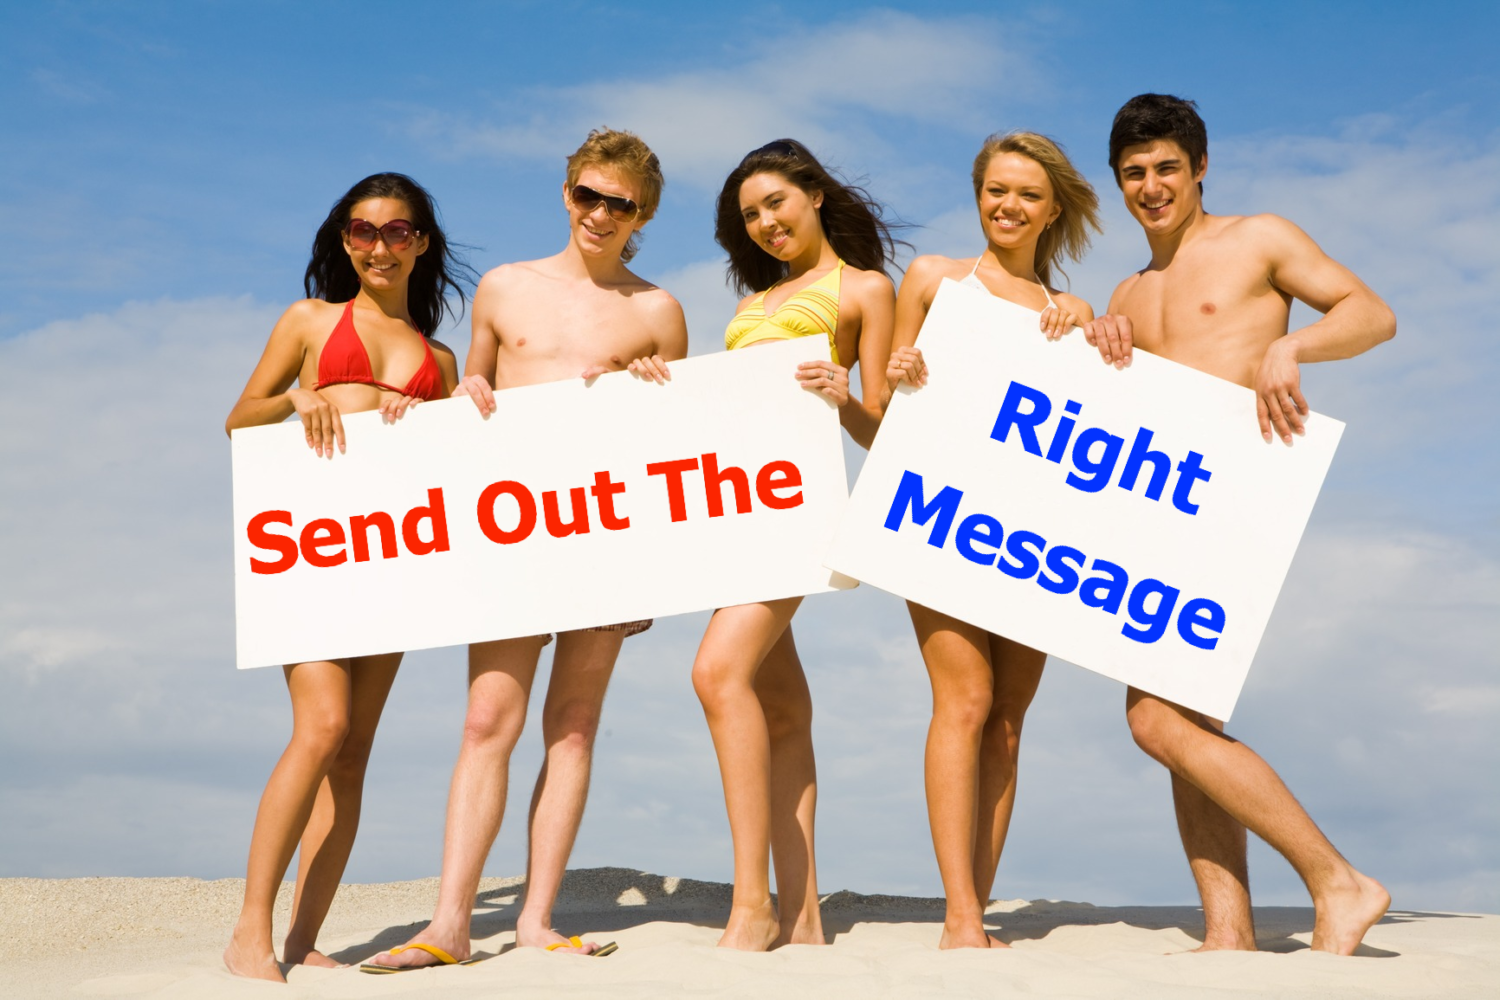 Send Out The Right Message